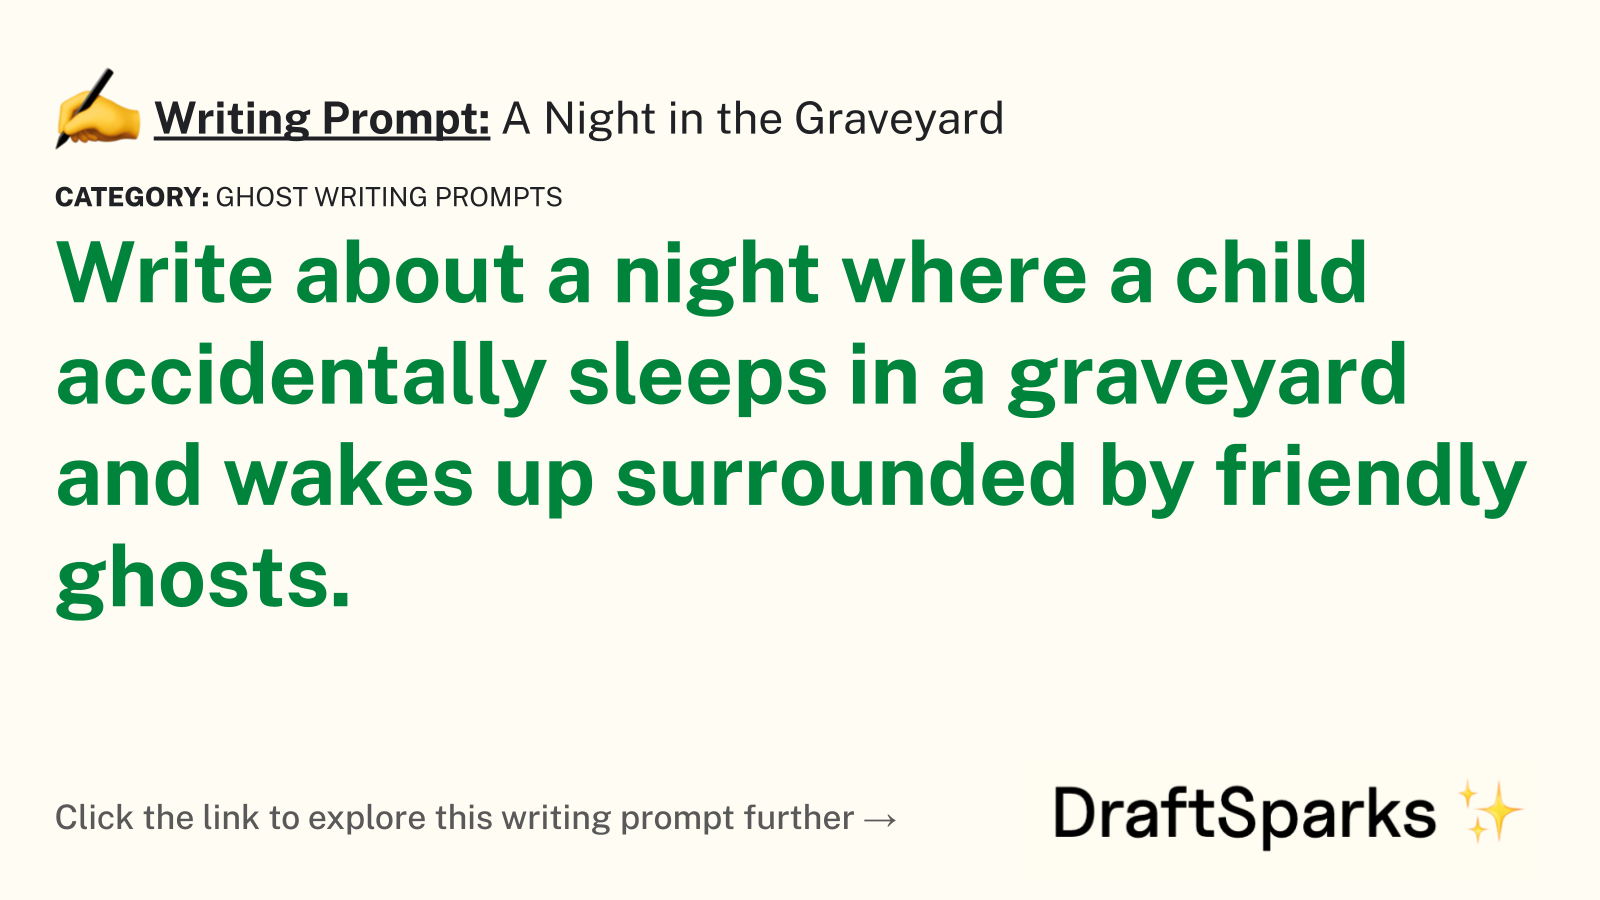 A Night in the Graveyard